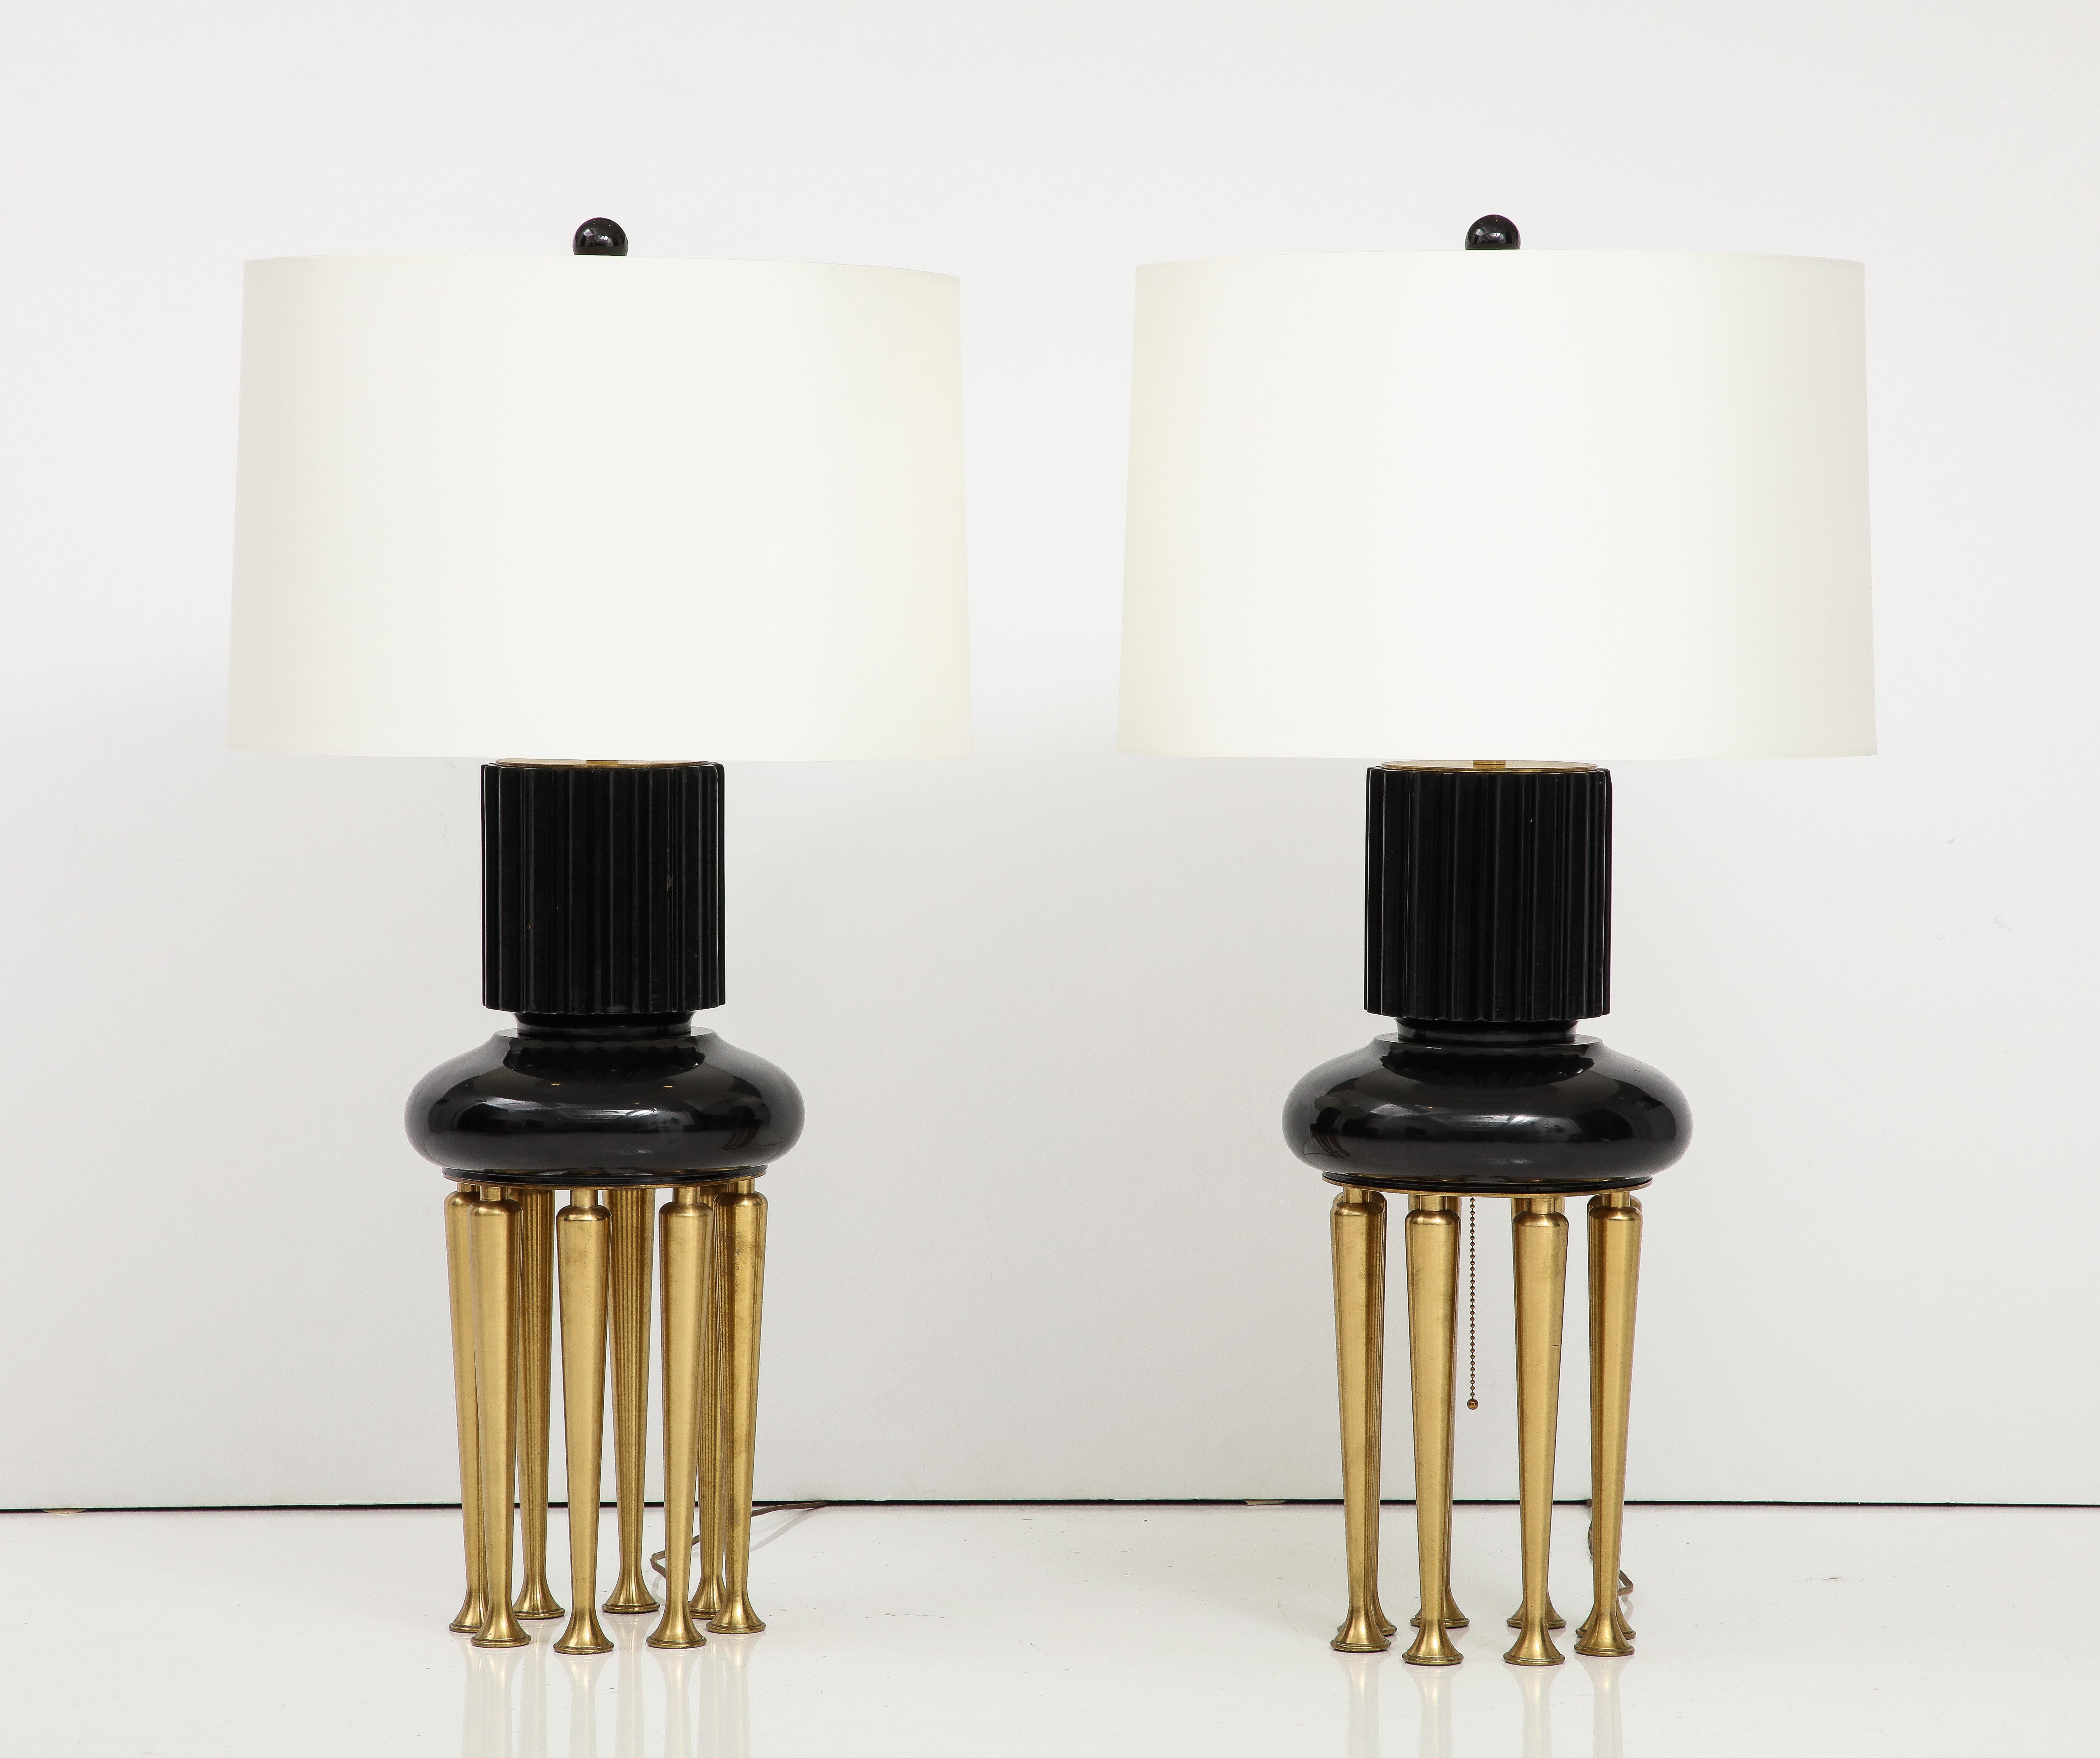 Spectacular Rare pair of 1950's James Mont lamps.
The main lacquered lamp bodies are supported by eight tapered 
brass legs, and they have been Newly rewired for the US with
adjustable polished brass double clusters.
The height off the lamp to